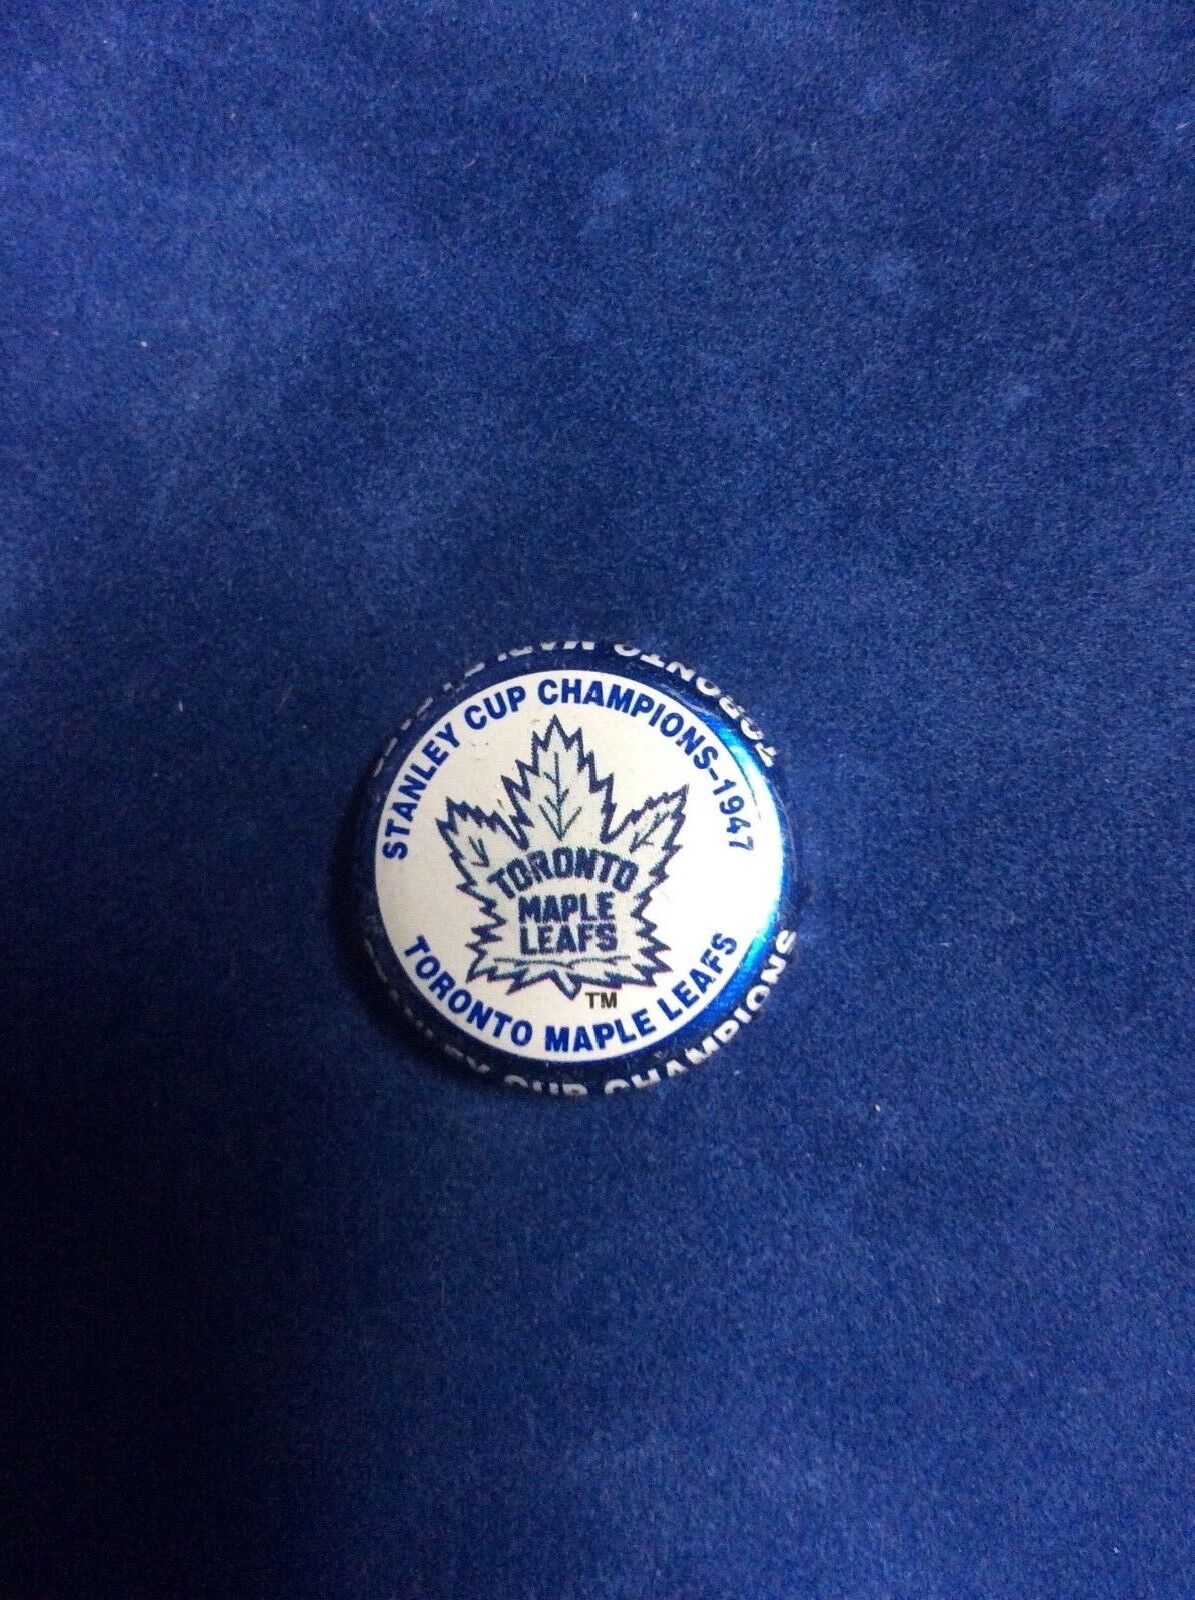 Stanley Cup Toronto Maple Leafs 1947 Limited Edition NHL Labatts Beer Cap 2001